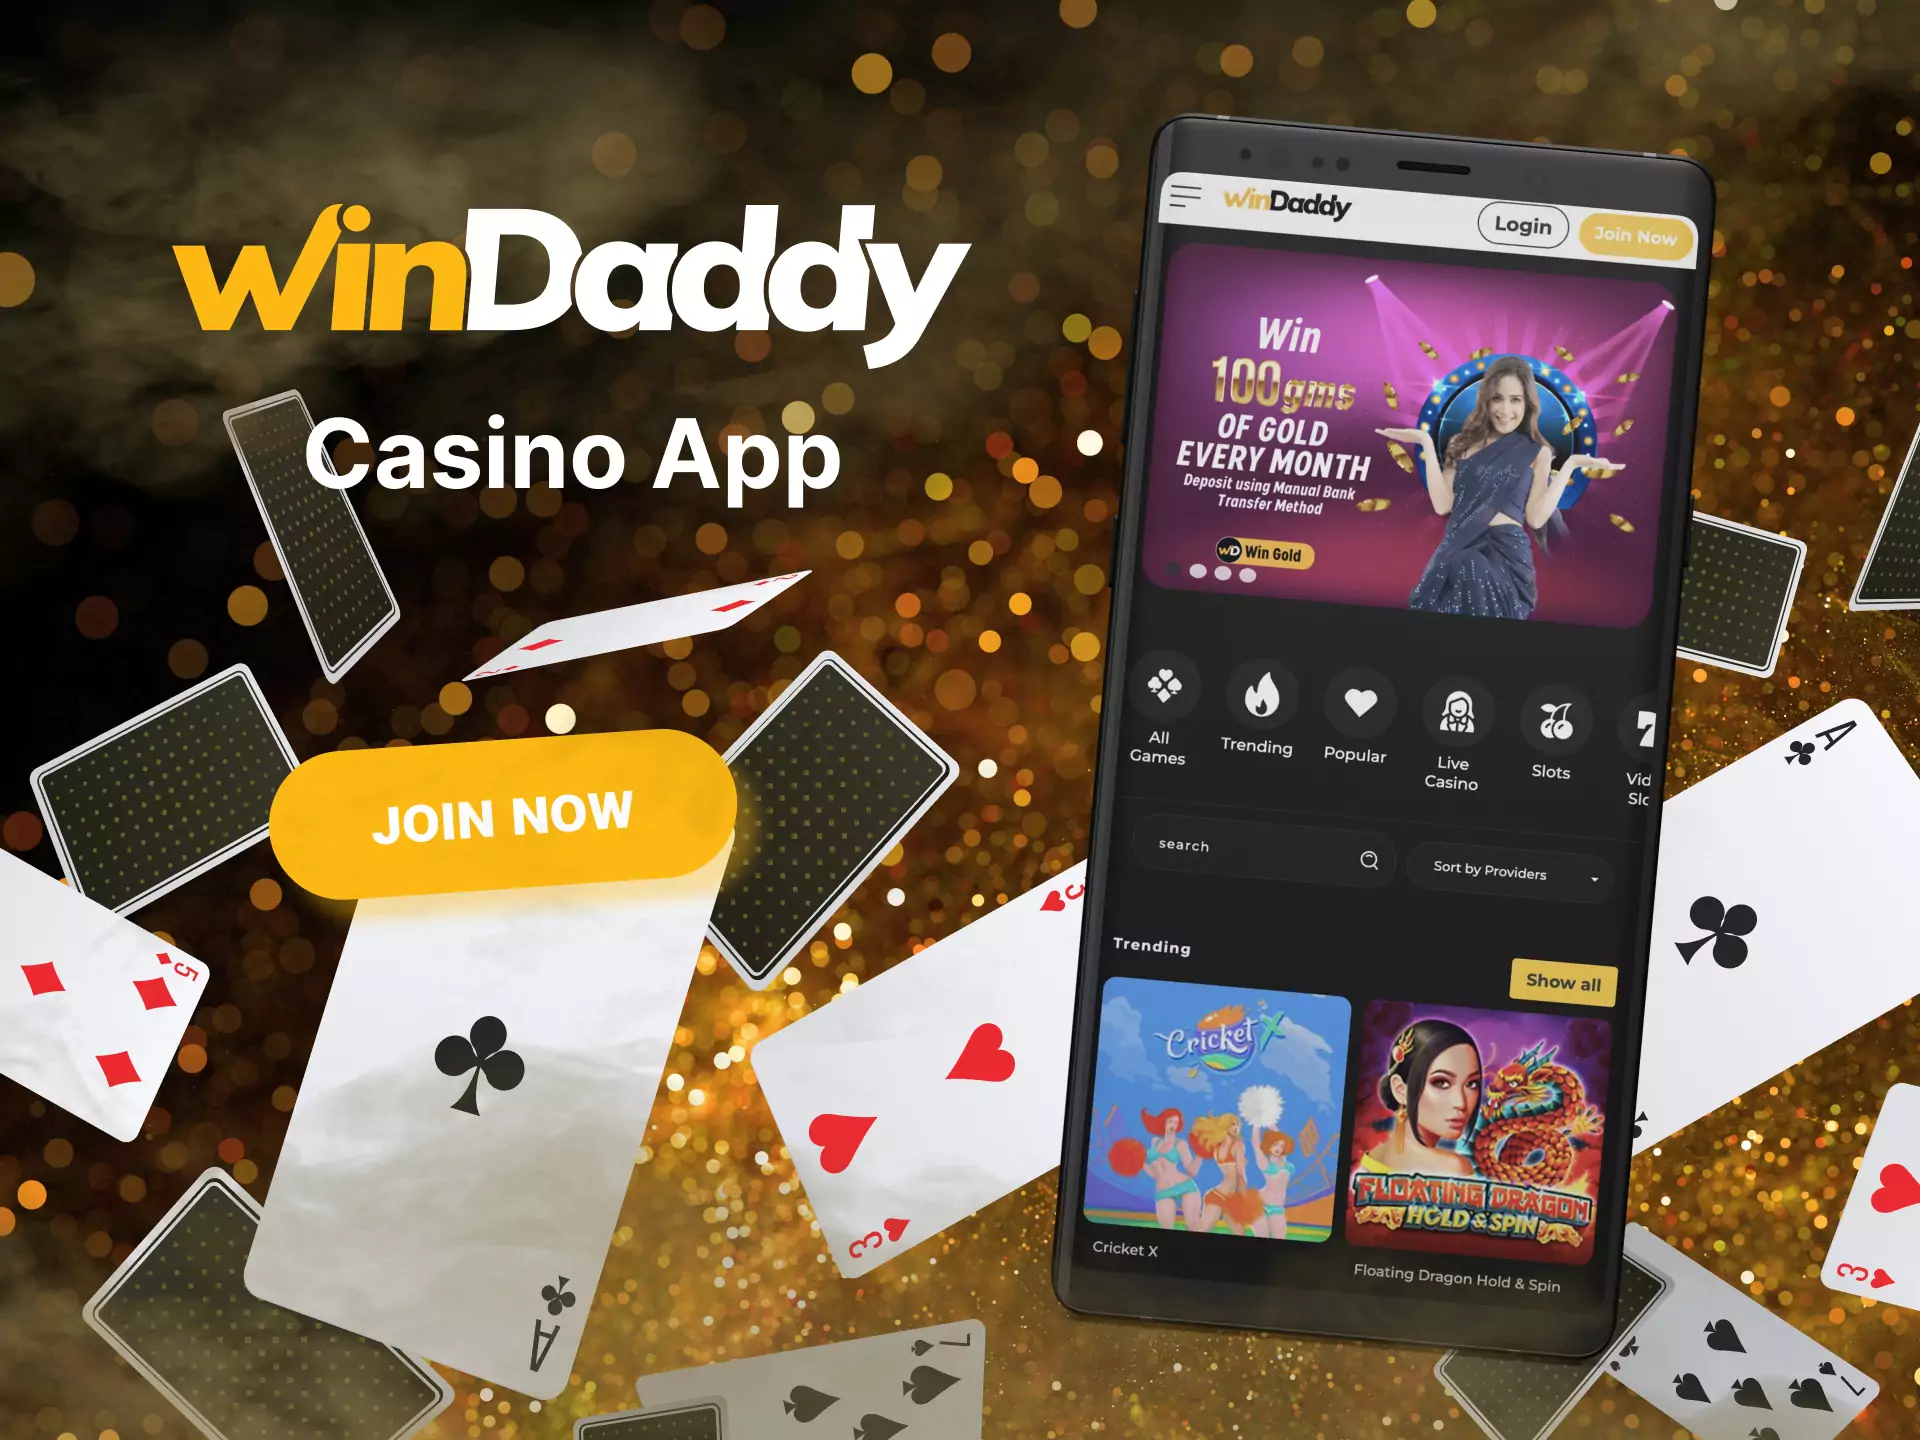 Find your favorite casino game at Windaddy and place your bet.